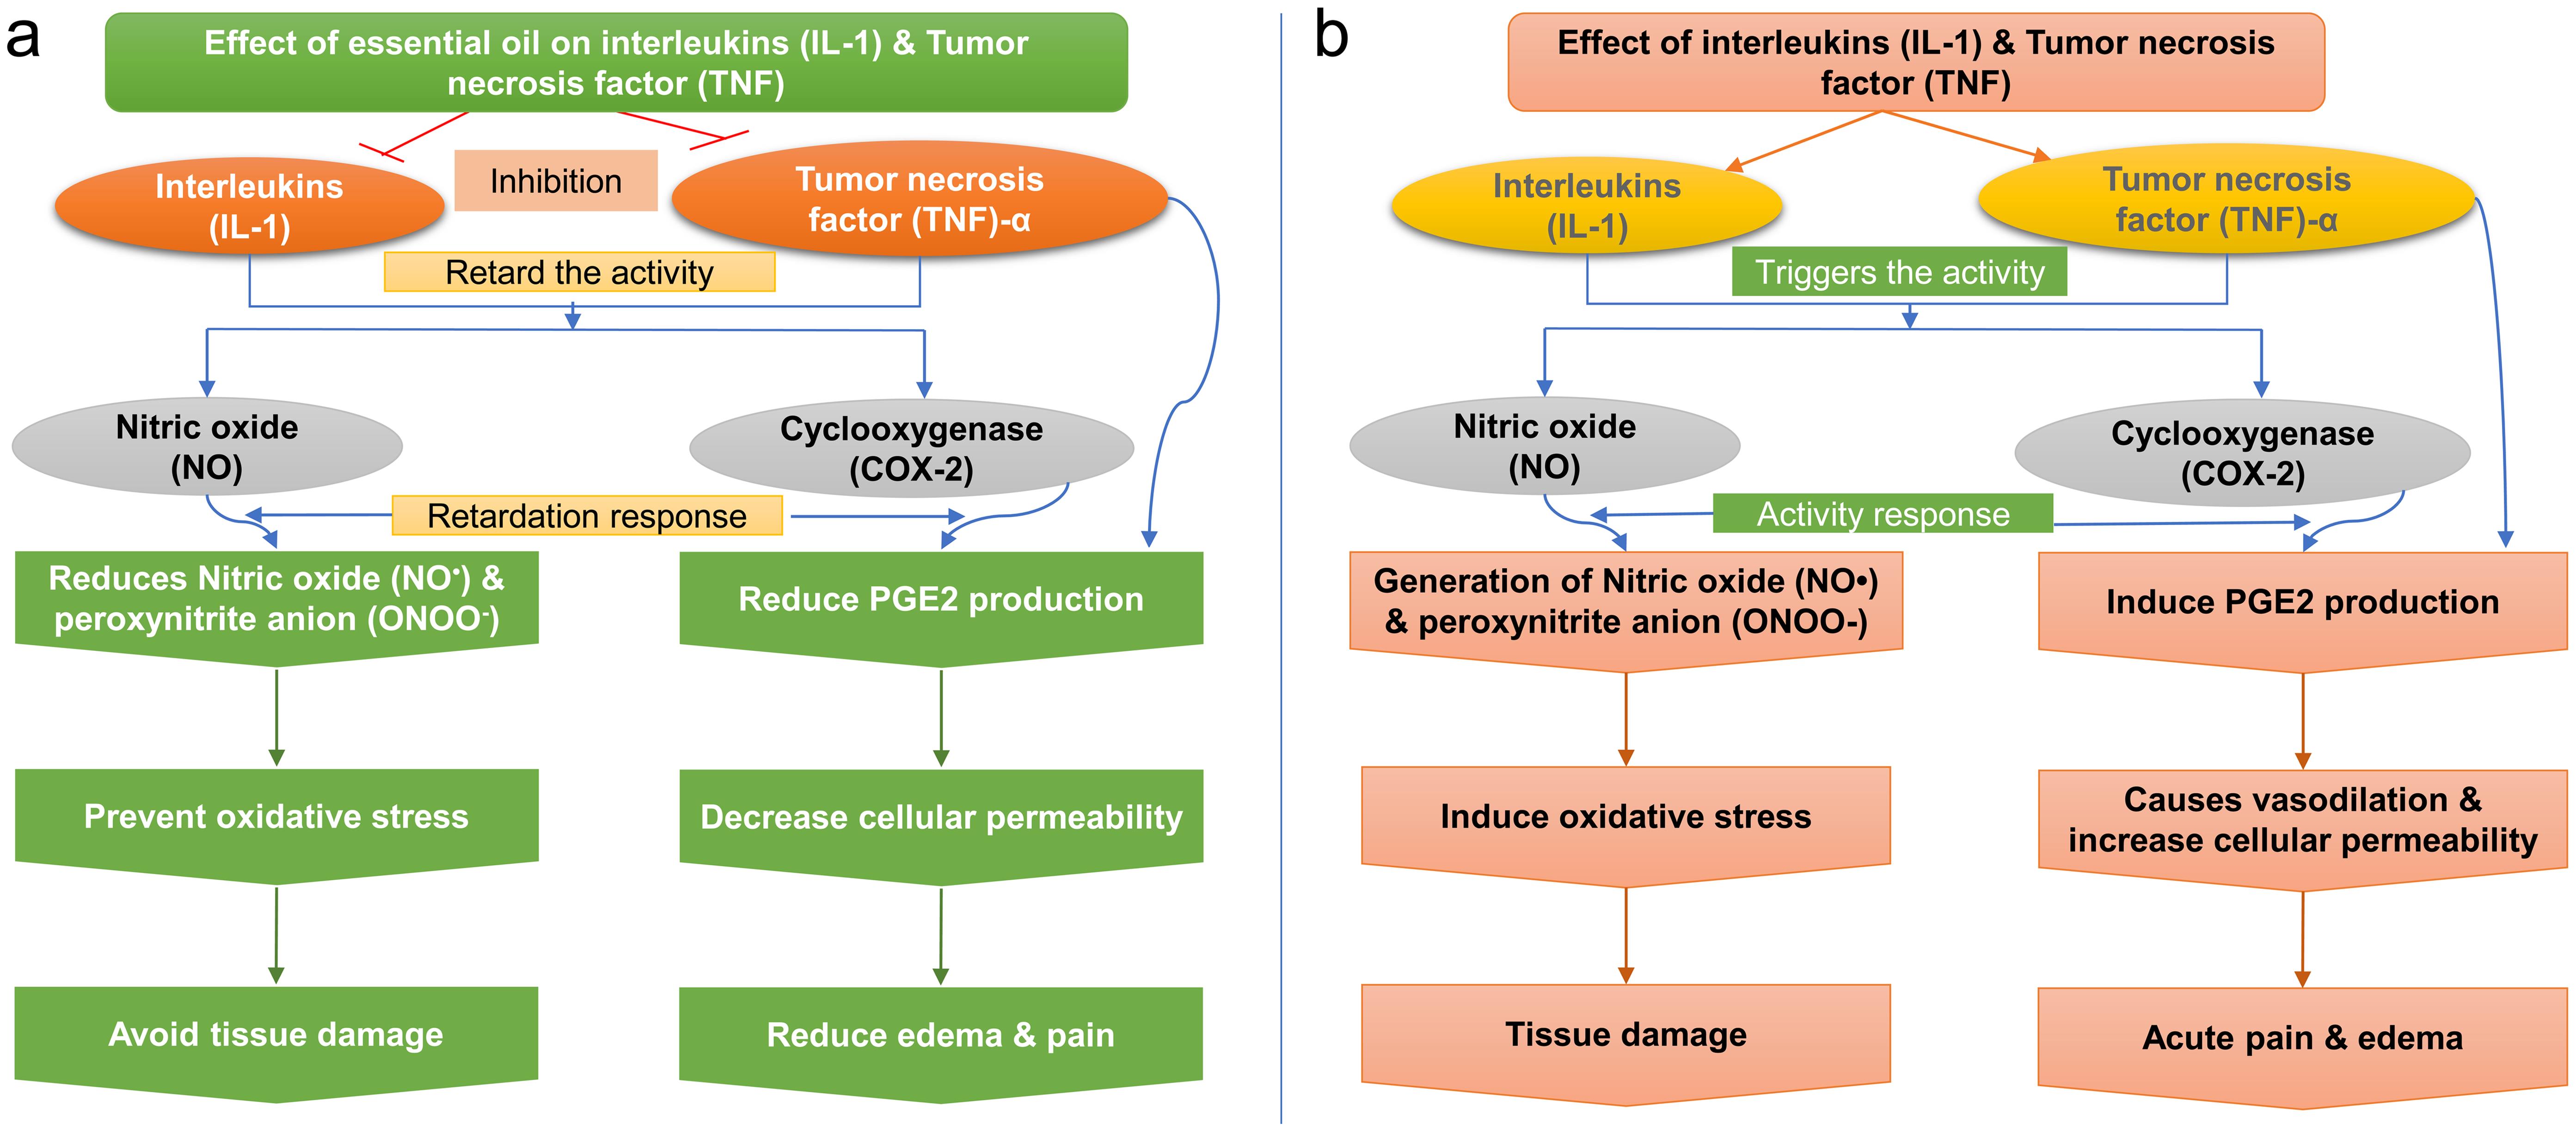 Inflammatory response of interleukins and TNF and curative mechanism of essential oils.